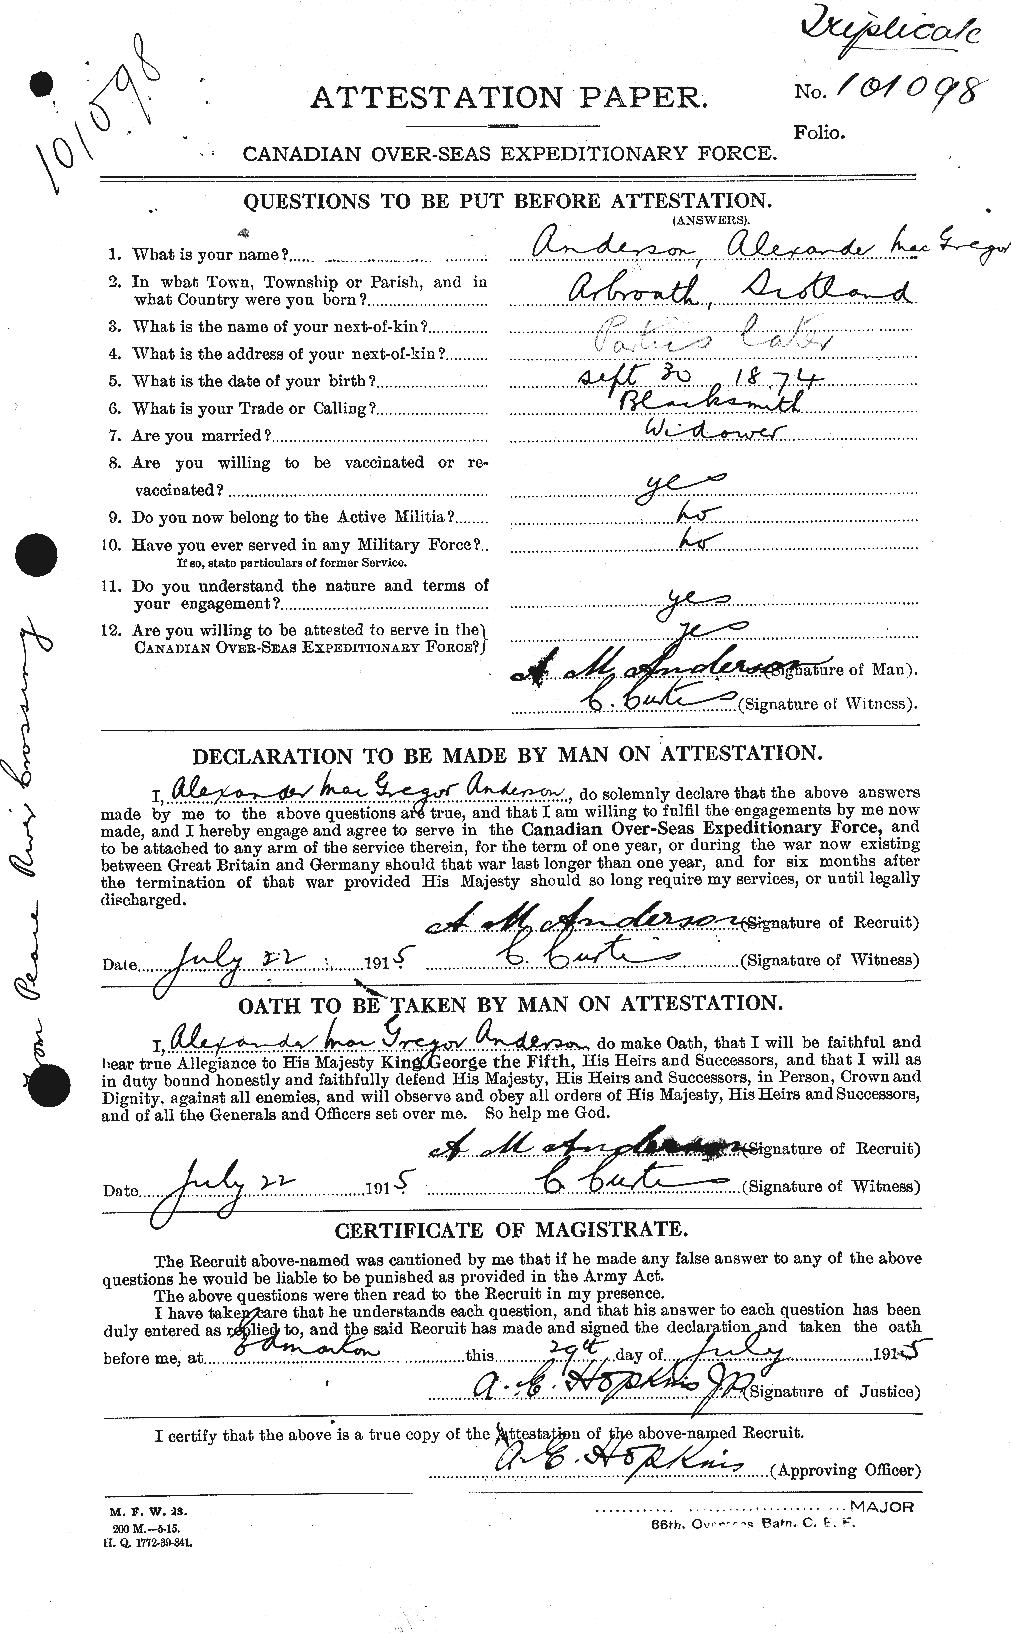 Personnel Records of the First World War - CEF 209482a